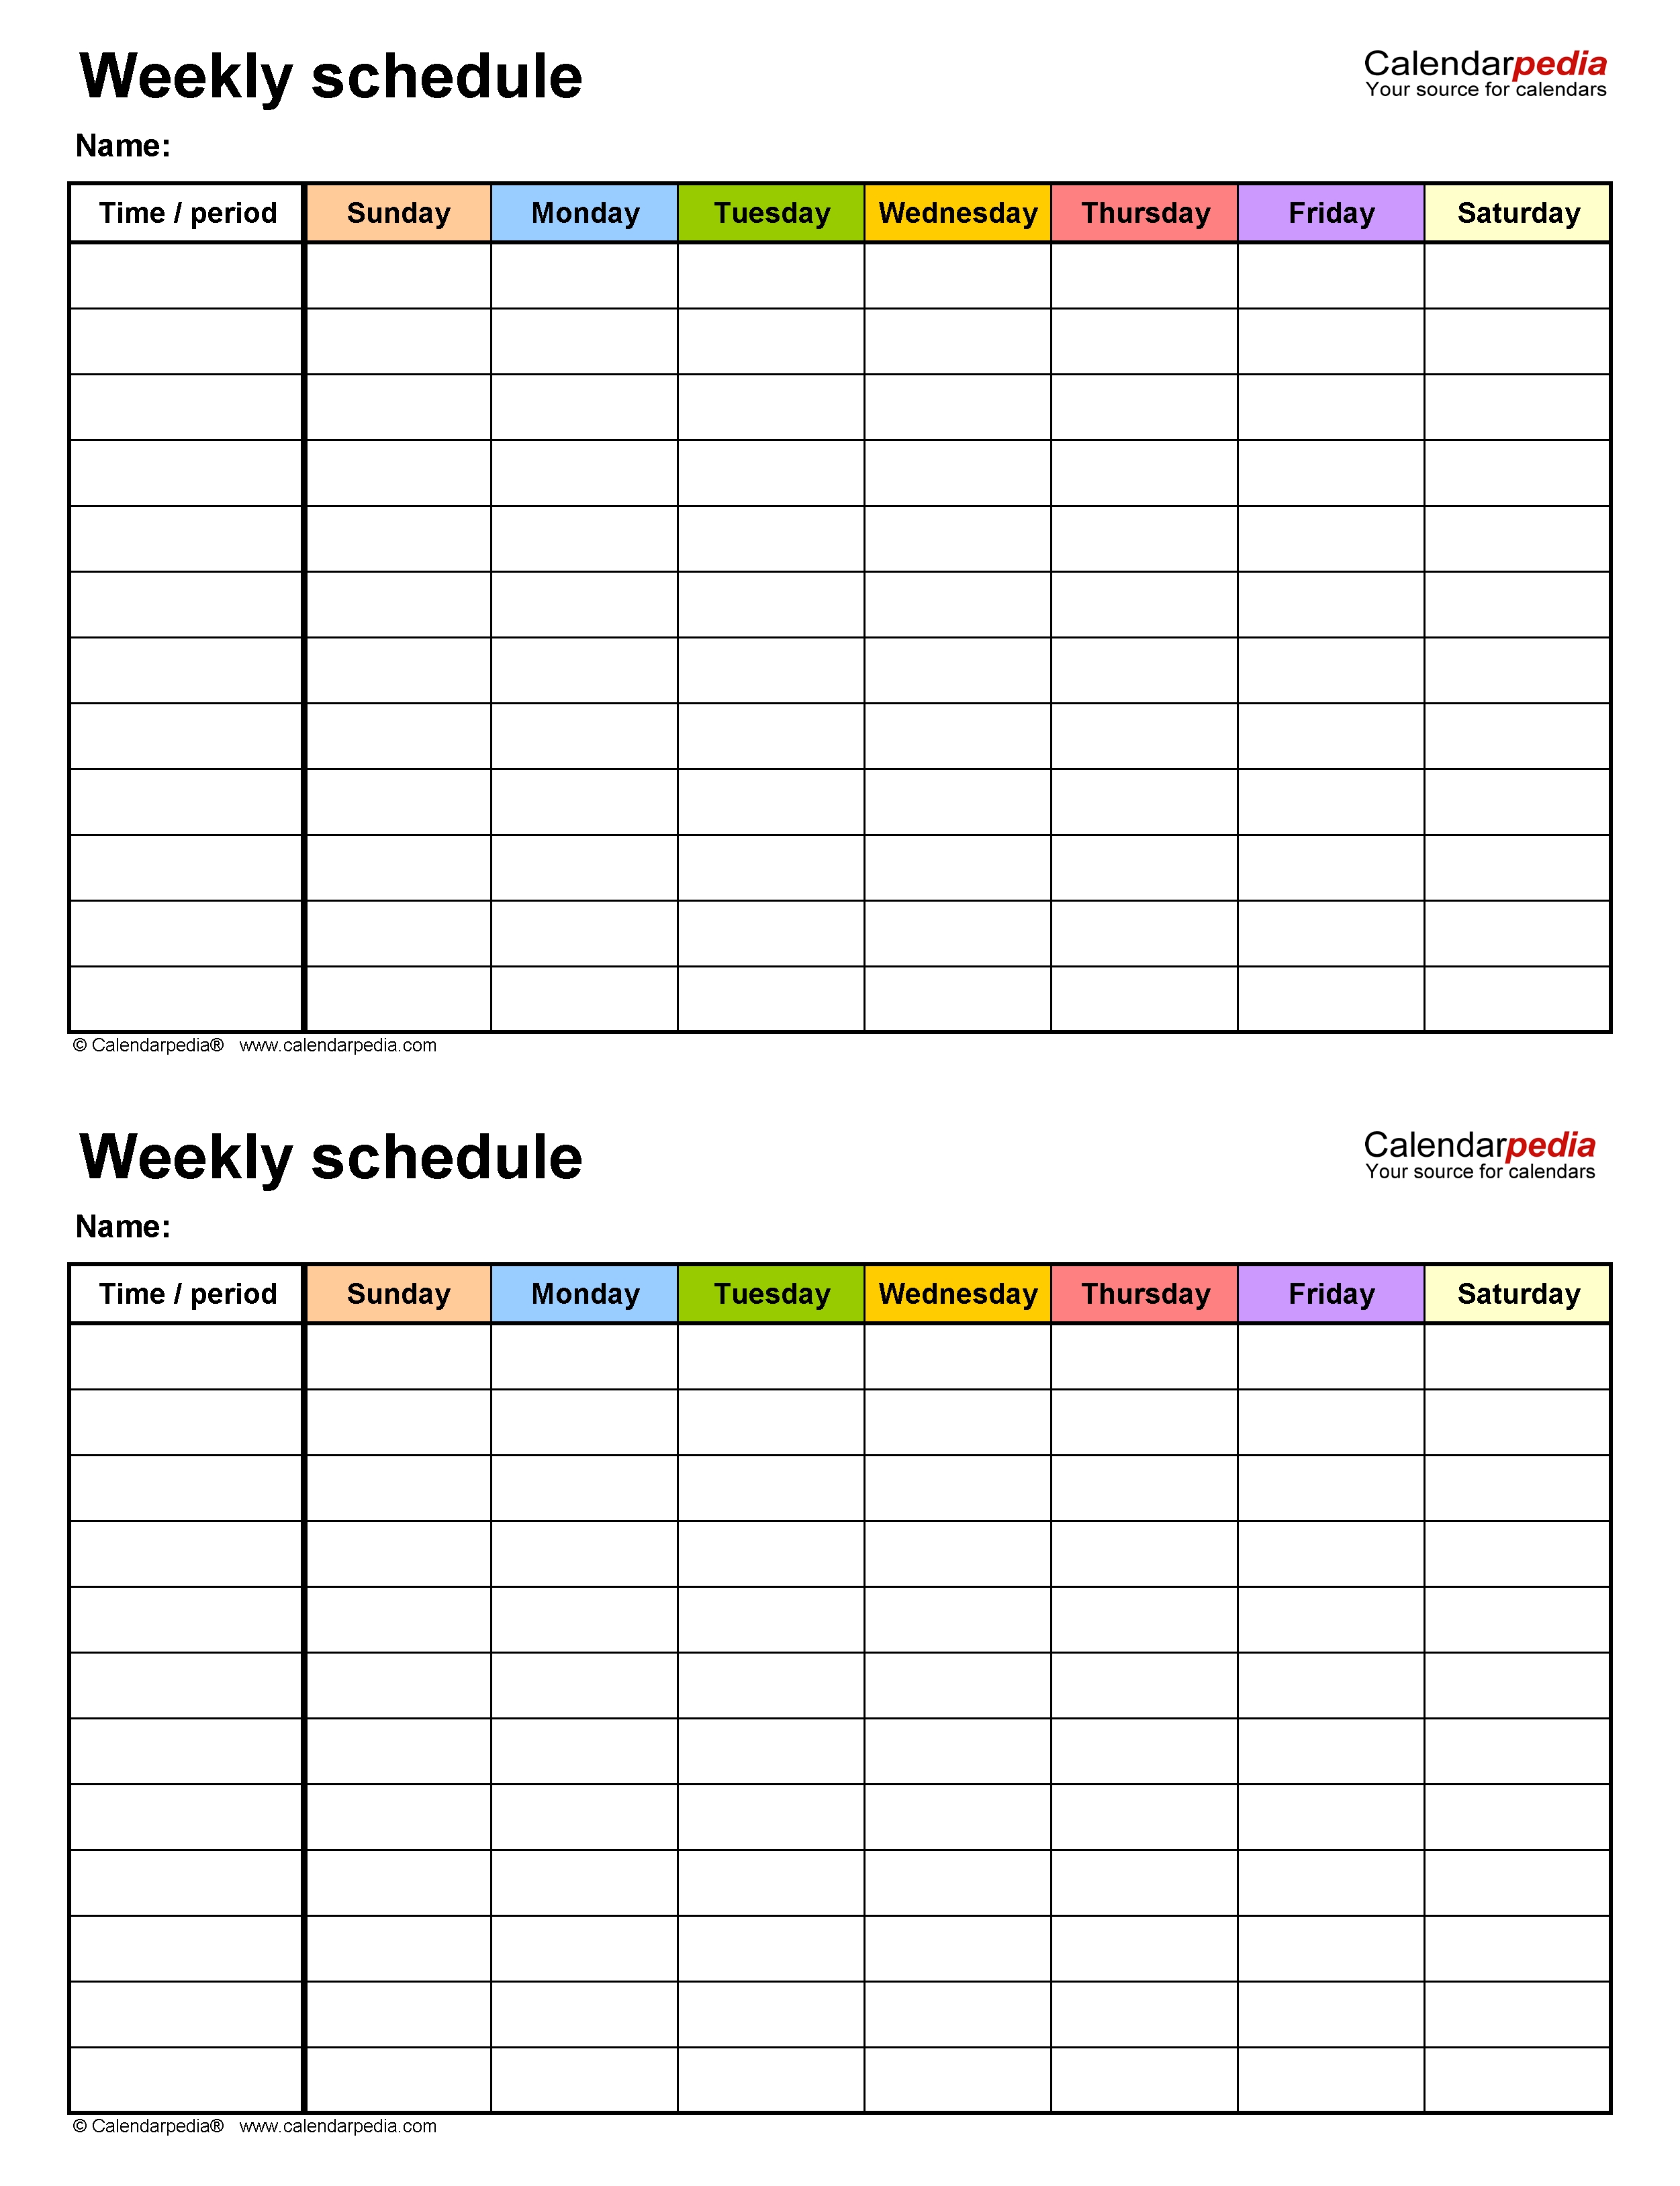 Free Weekly Schedule Templates For Excel - 18 Templates Calendar Week Template Excel